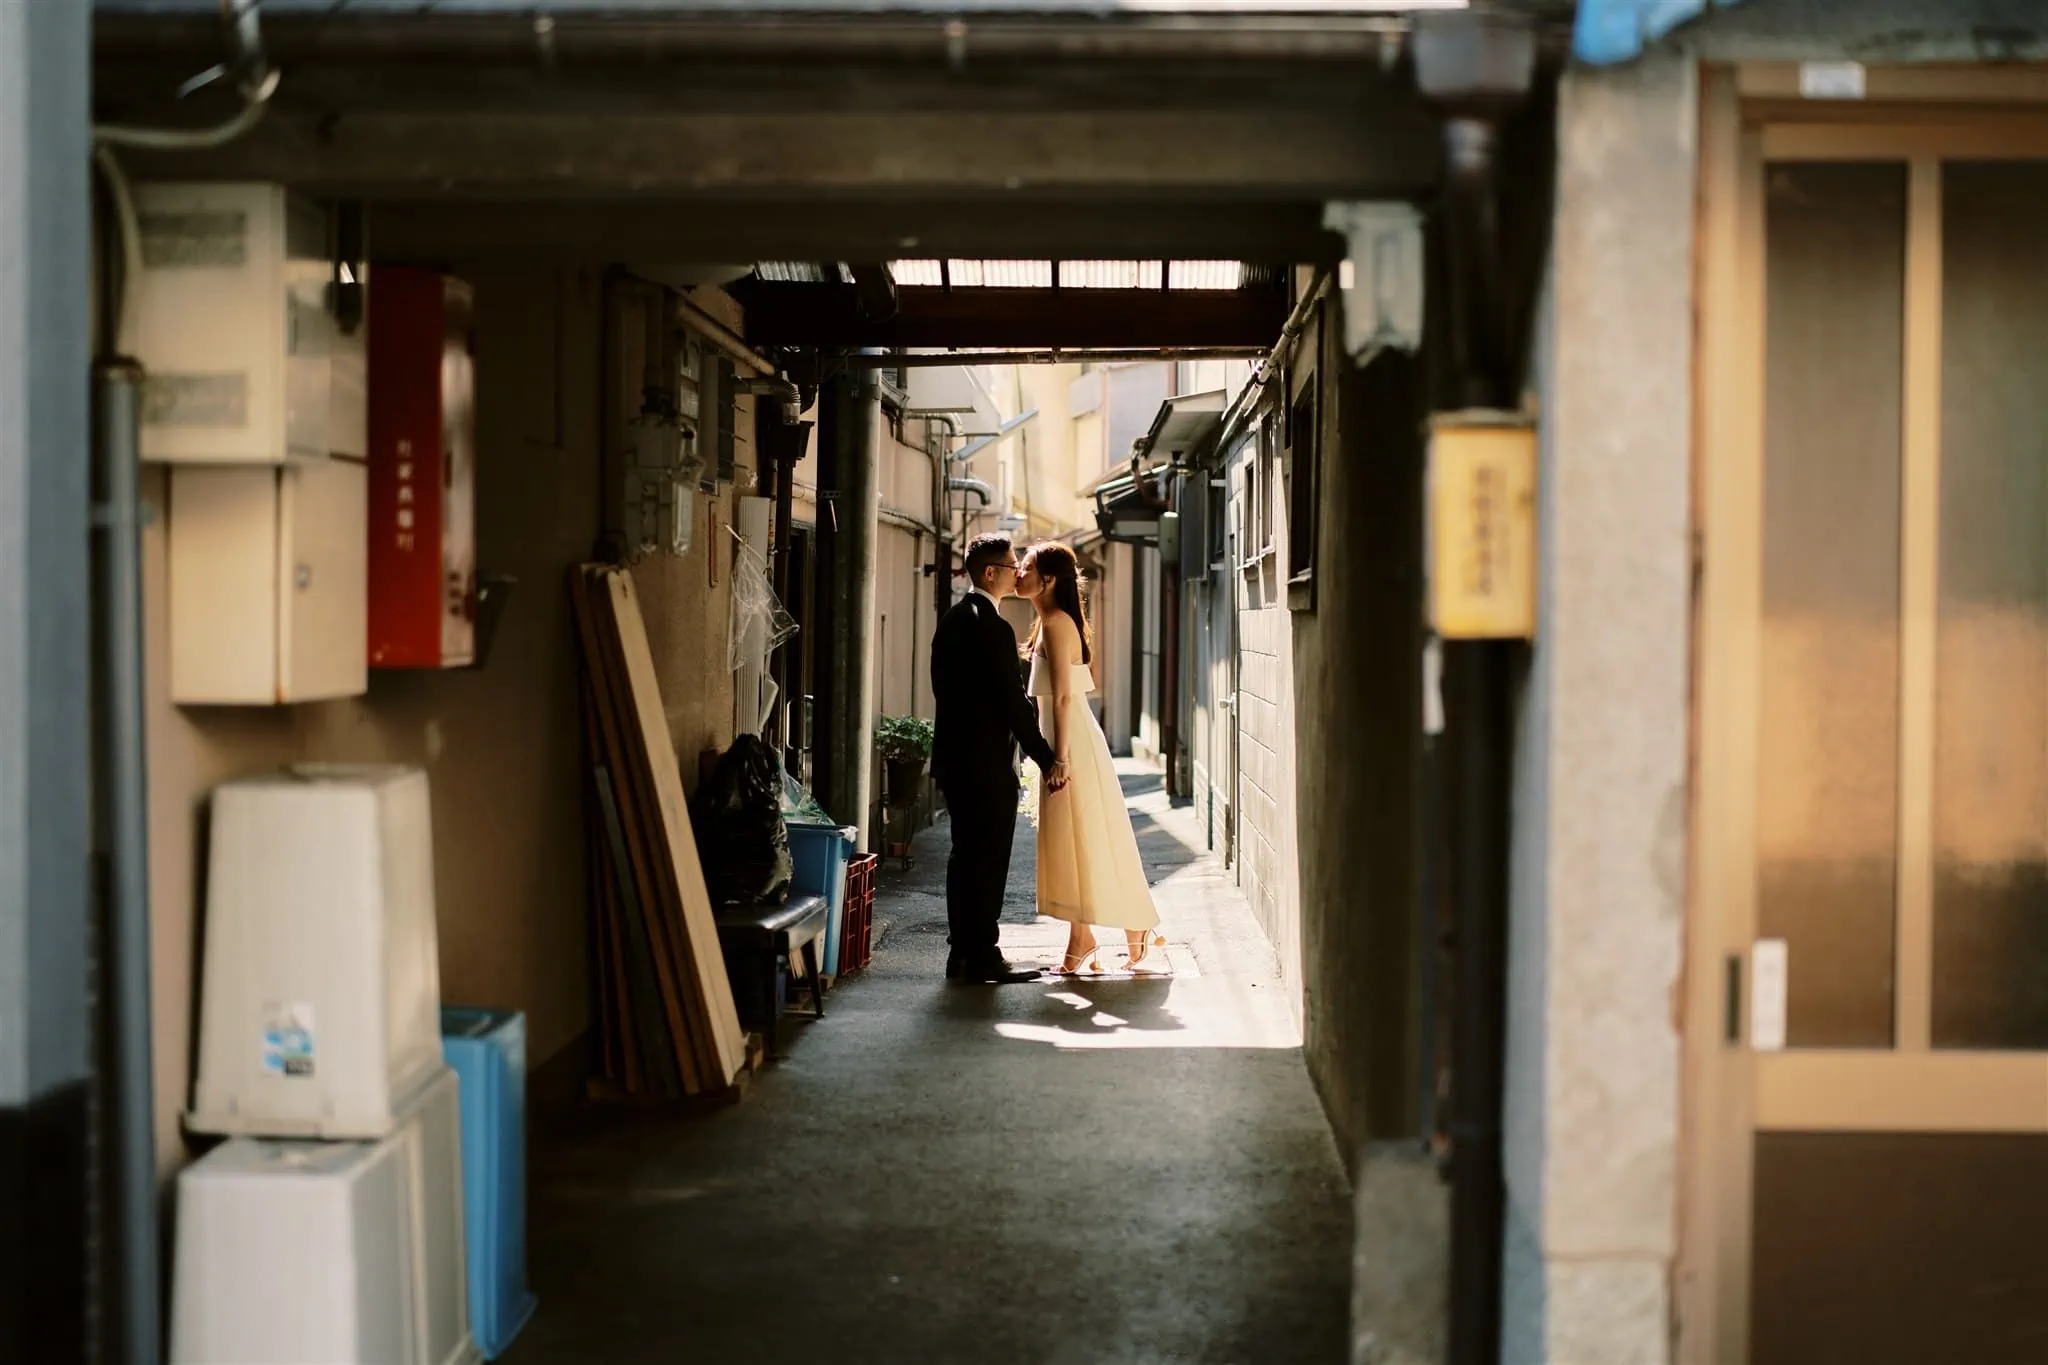 Kyoto Tokyo Japan Elopement Wedding Photographer, Planner & Videographer | A Japan elopement featuring a bride and groom passionately kissing in an alleyway.